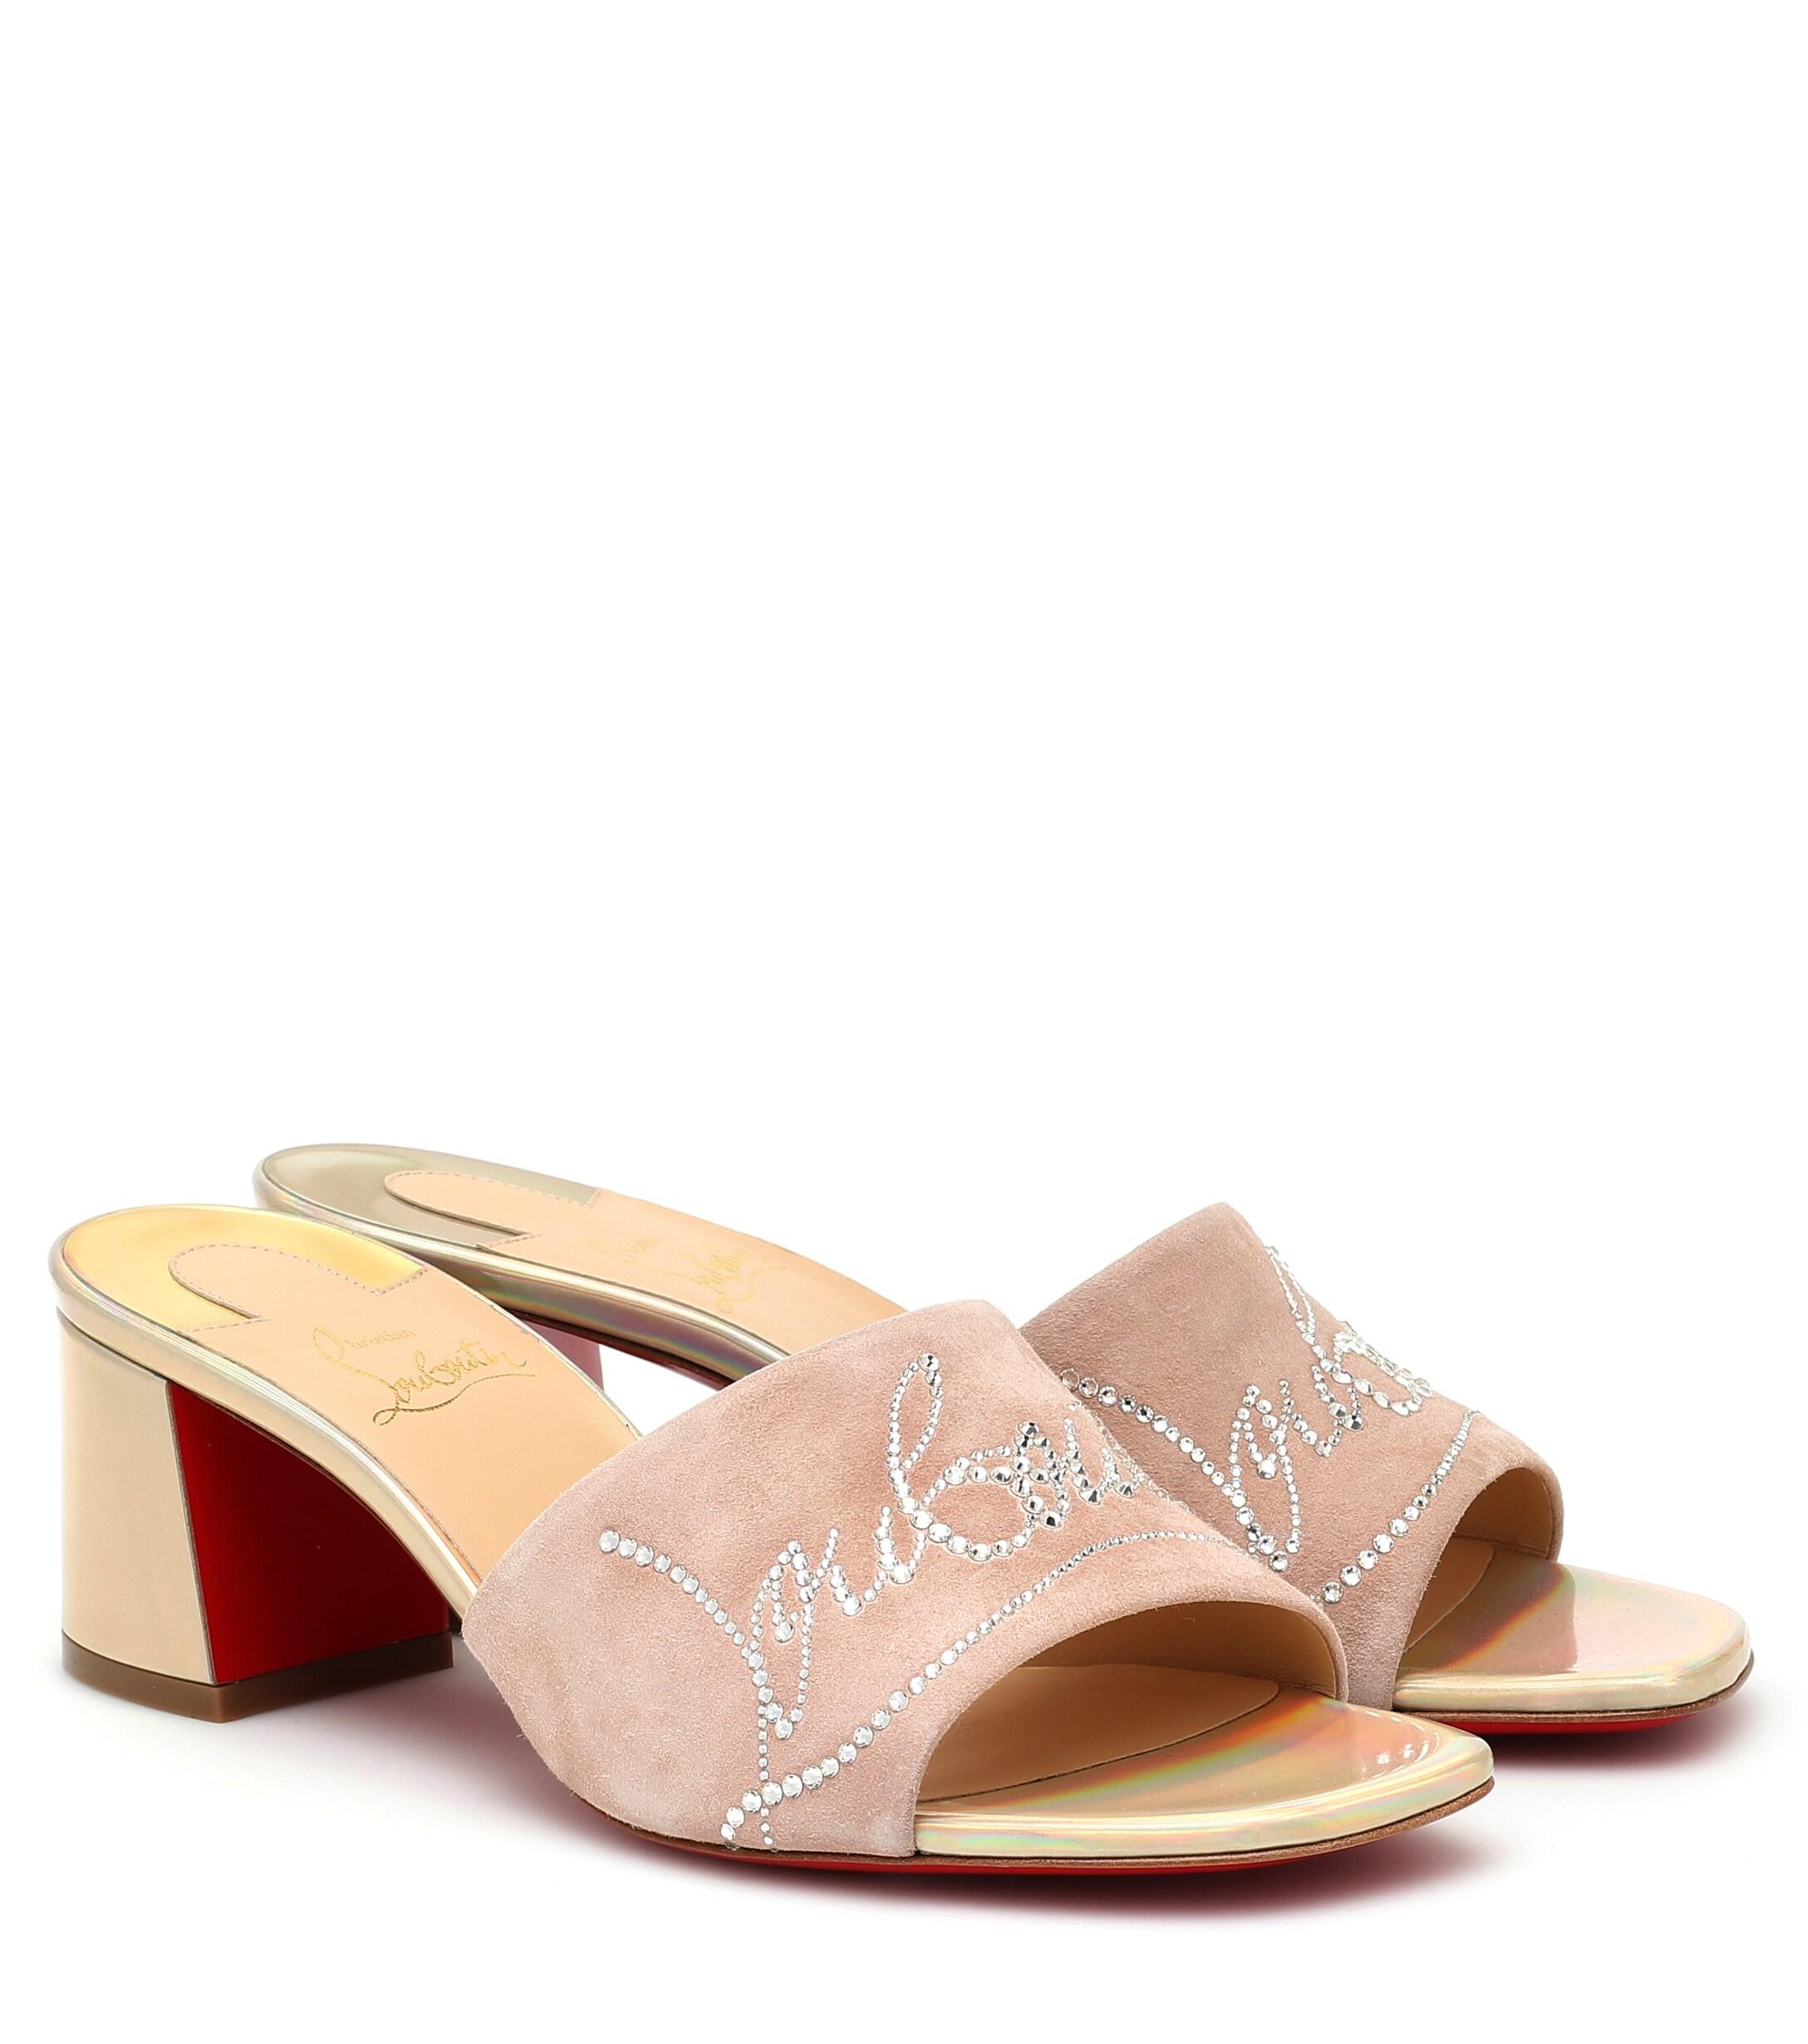 Christian Louboutin Dear Home 55 Embellished Suede Sandals in Pink | Lyst